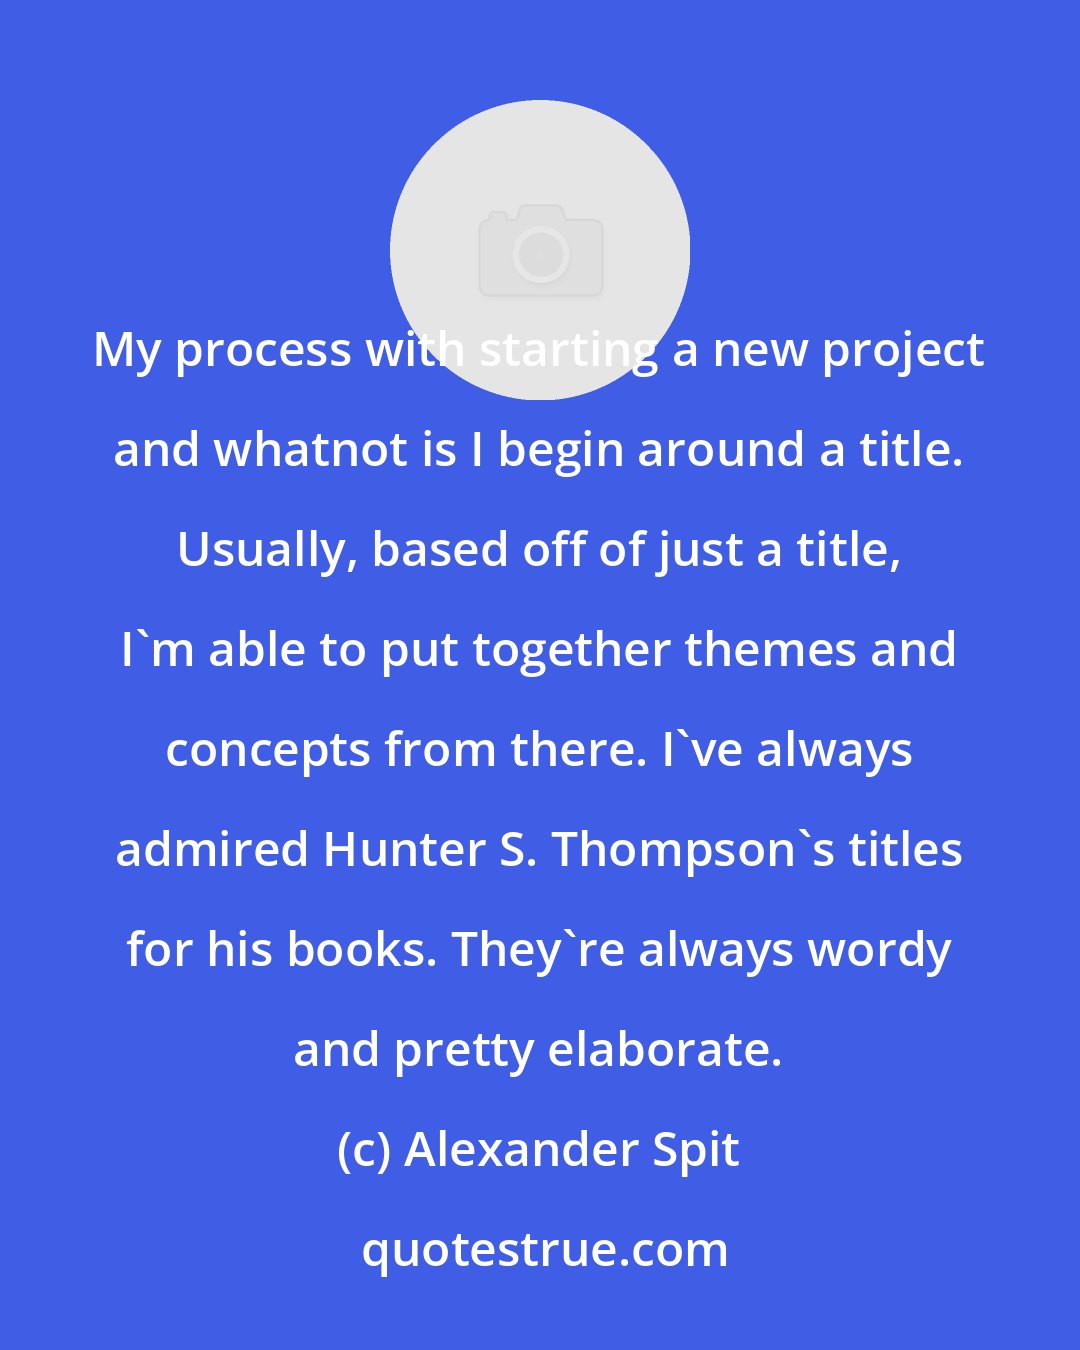 Alexander Spit: My process with starting a new project and whatnot is I begin around a title. Usually, based off of just a title, I'm able to put together themes and concepts from there. I've always admired Hunter S. Thompson's titles for his books. They're always wordy and pretty elaborate.